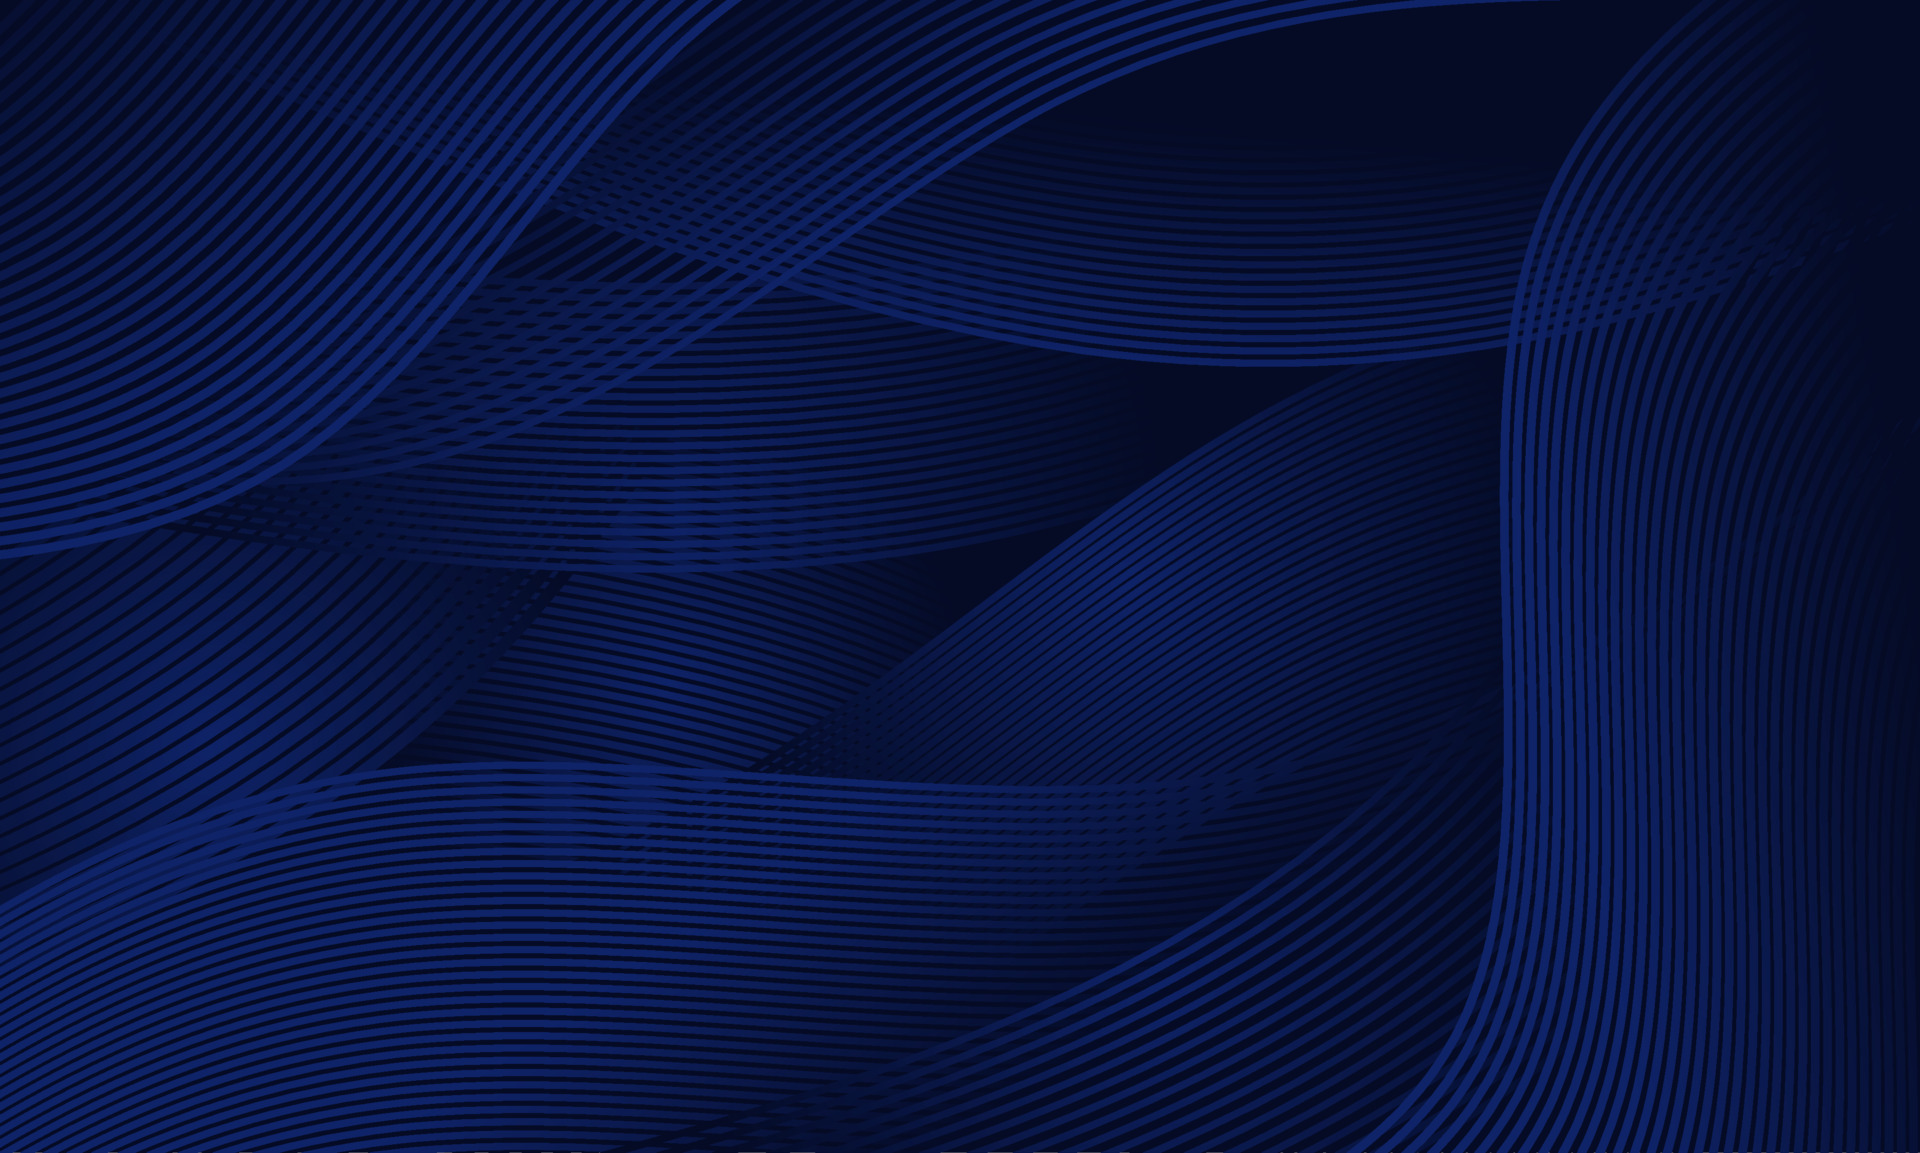  Gorgeous Dark Blue Abstract Vector Art Icons  Spectacular Visuals for Free Download!